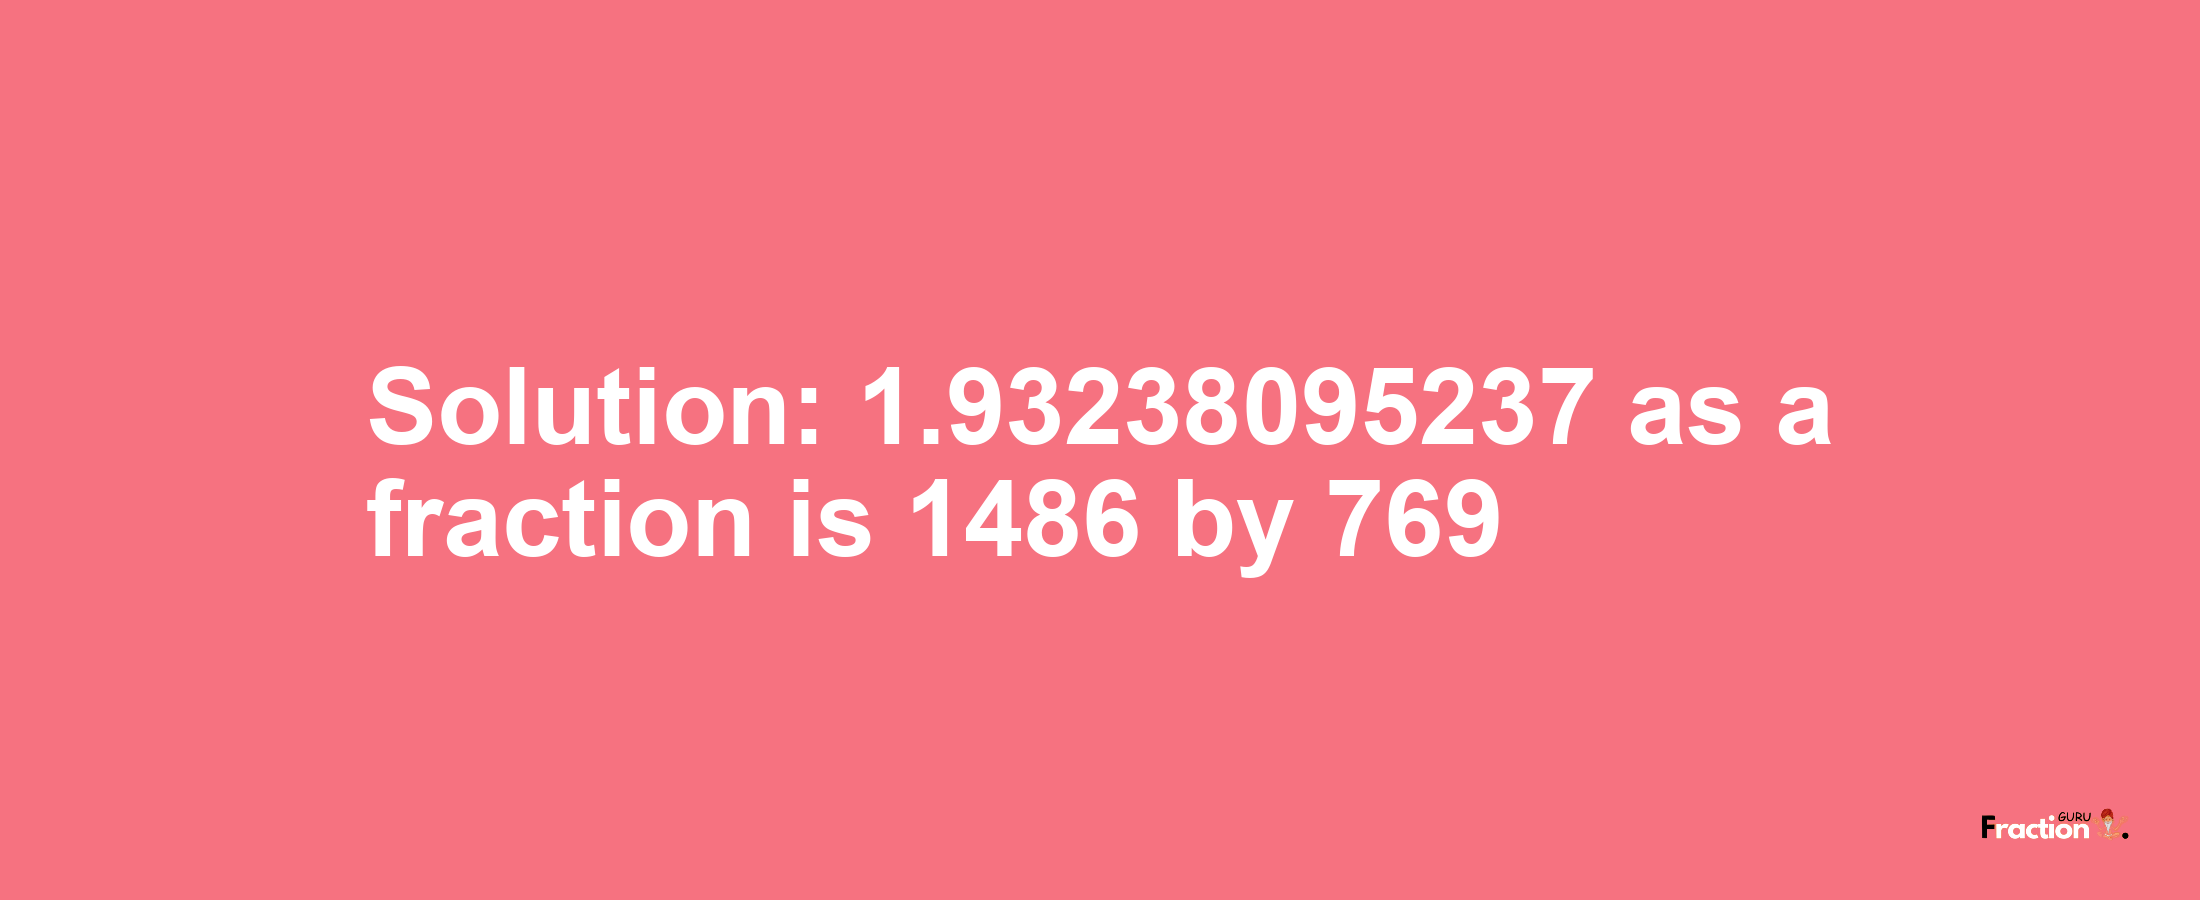 Solution:1.93238095237 as a fraction is 1486/769